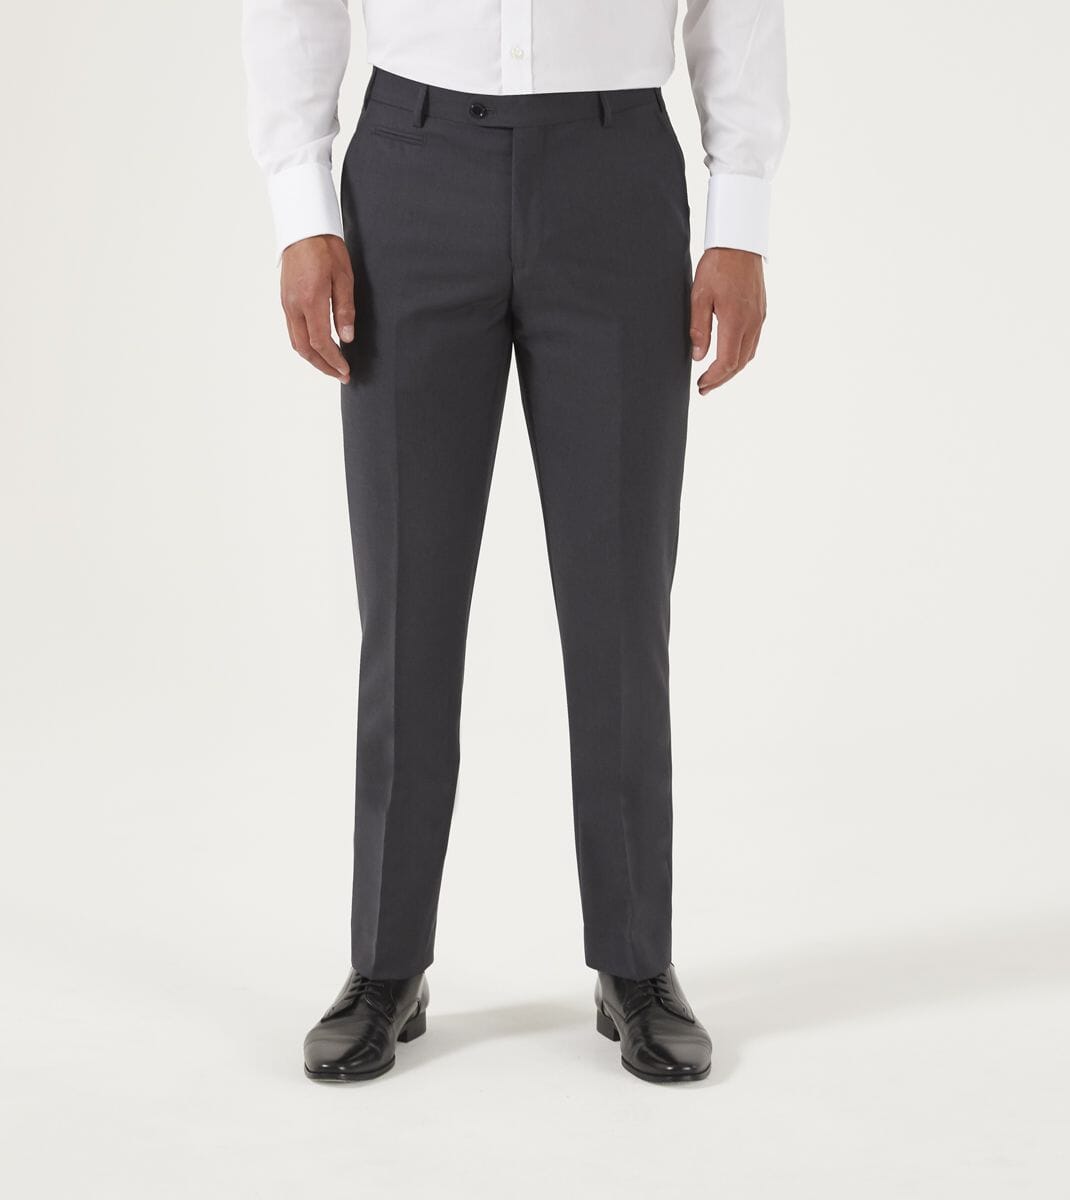 Madrid Charcoal Trousers - DUE 4/9/23 - Trousers - 28R - THREADPEPPER